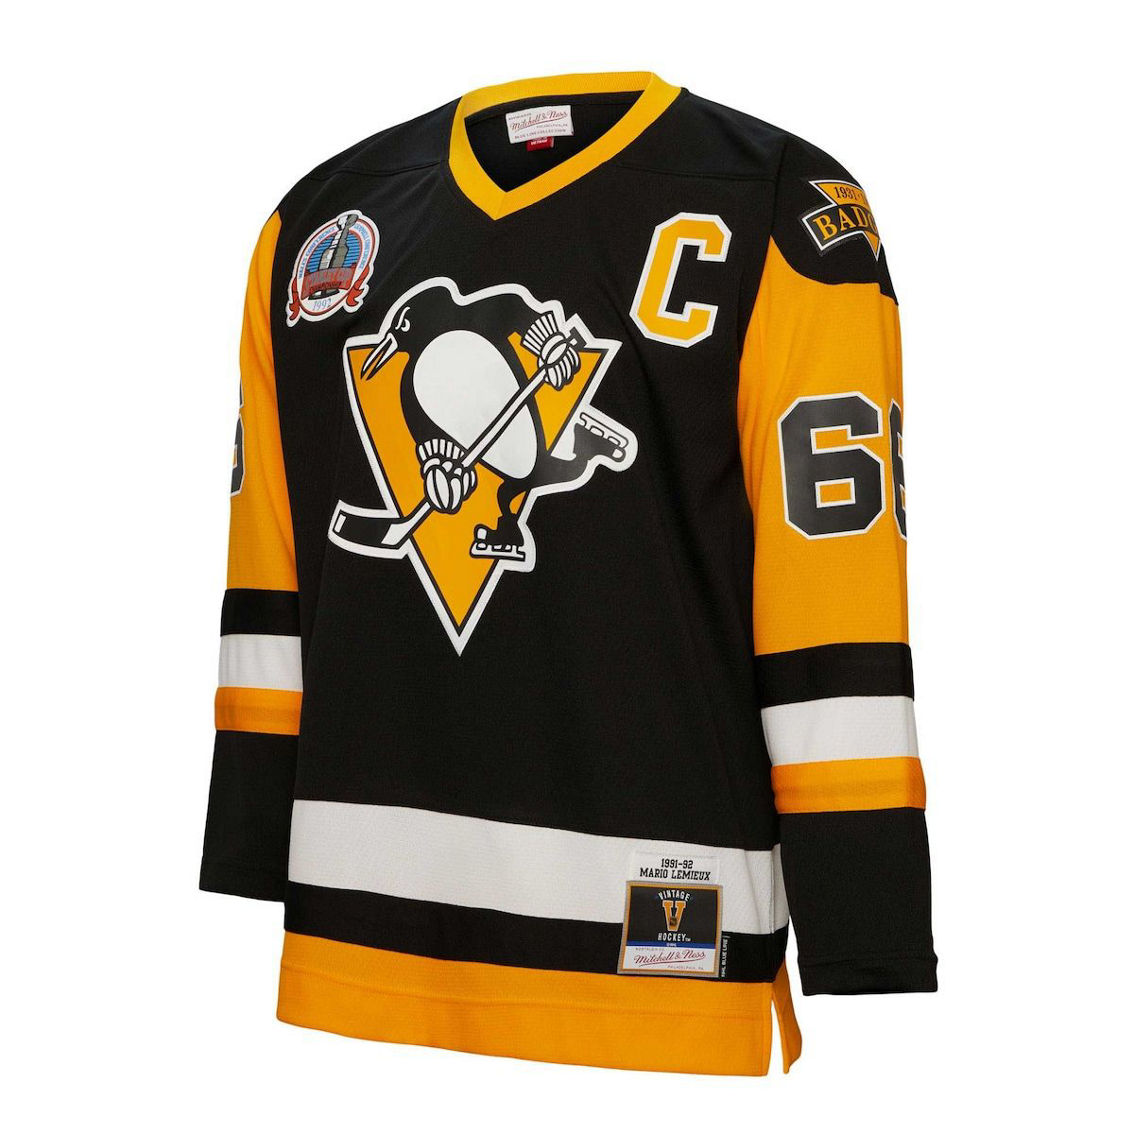 Mitchell & Ness Men's Mario Lemieux Black Pittsburgh Penguins Big & Tall 1991 Captain Patch Blue Line Player Jersey - Image 3 of 4